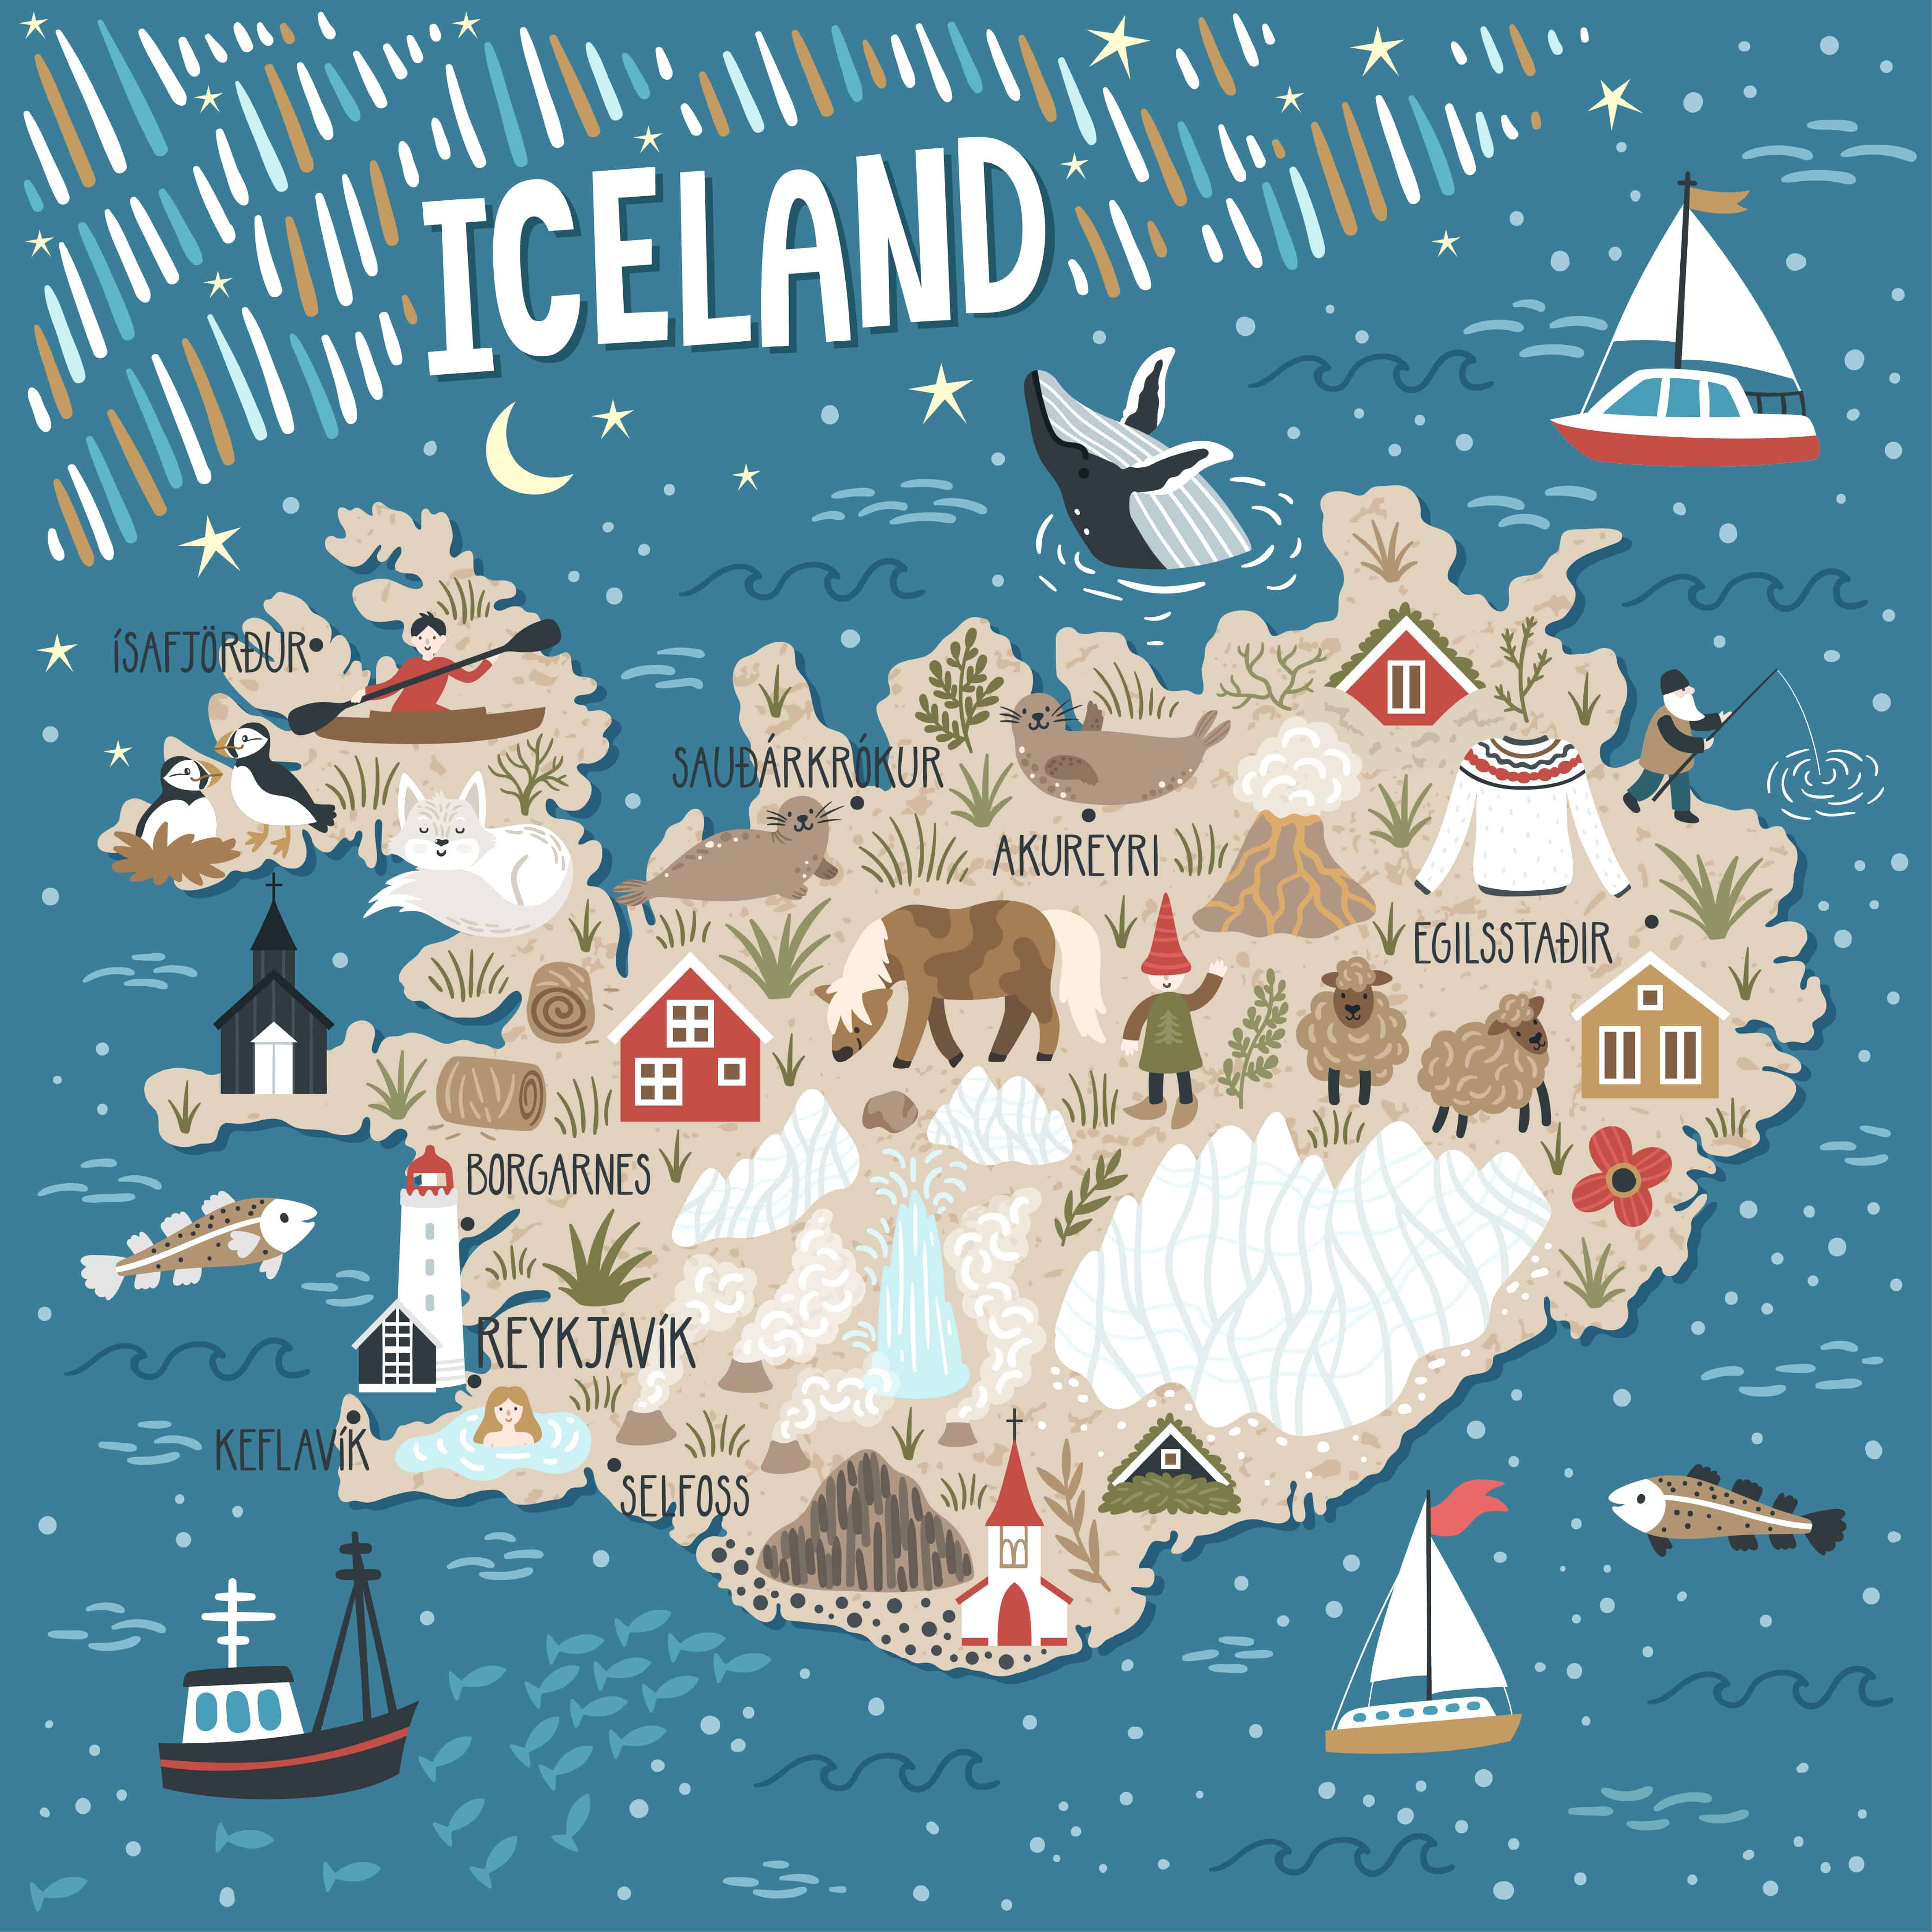 travel planning to iceland